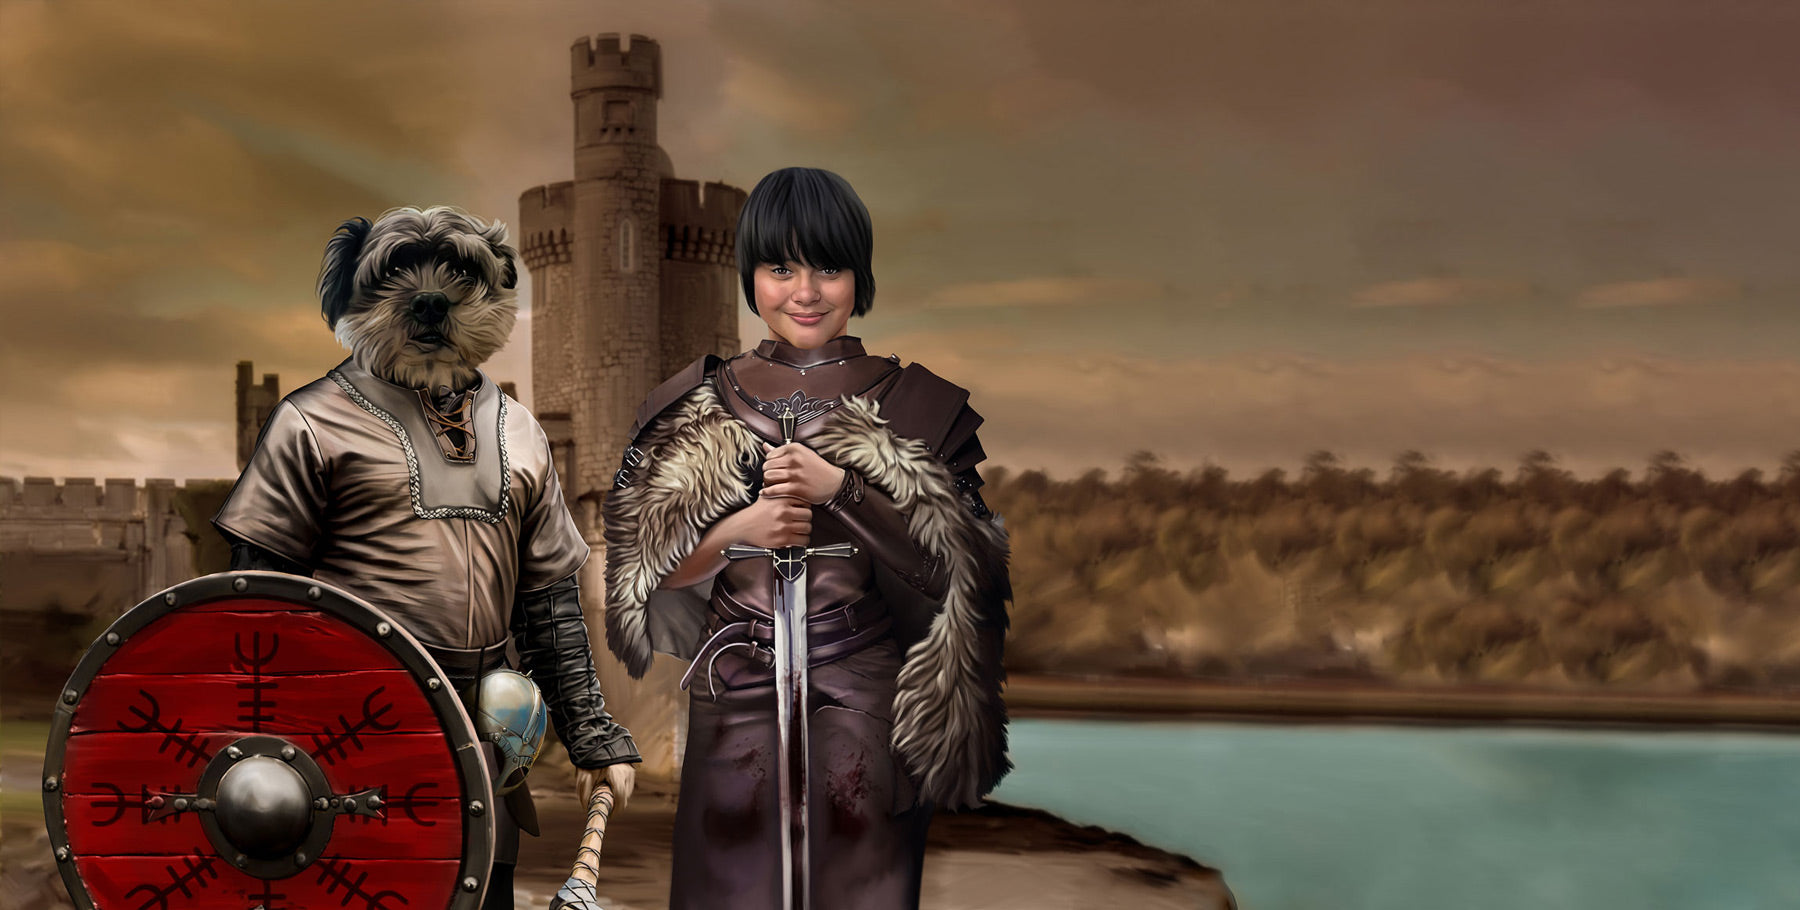 A funny custom-made royal couple portrait of people and pets in historical costumes